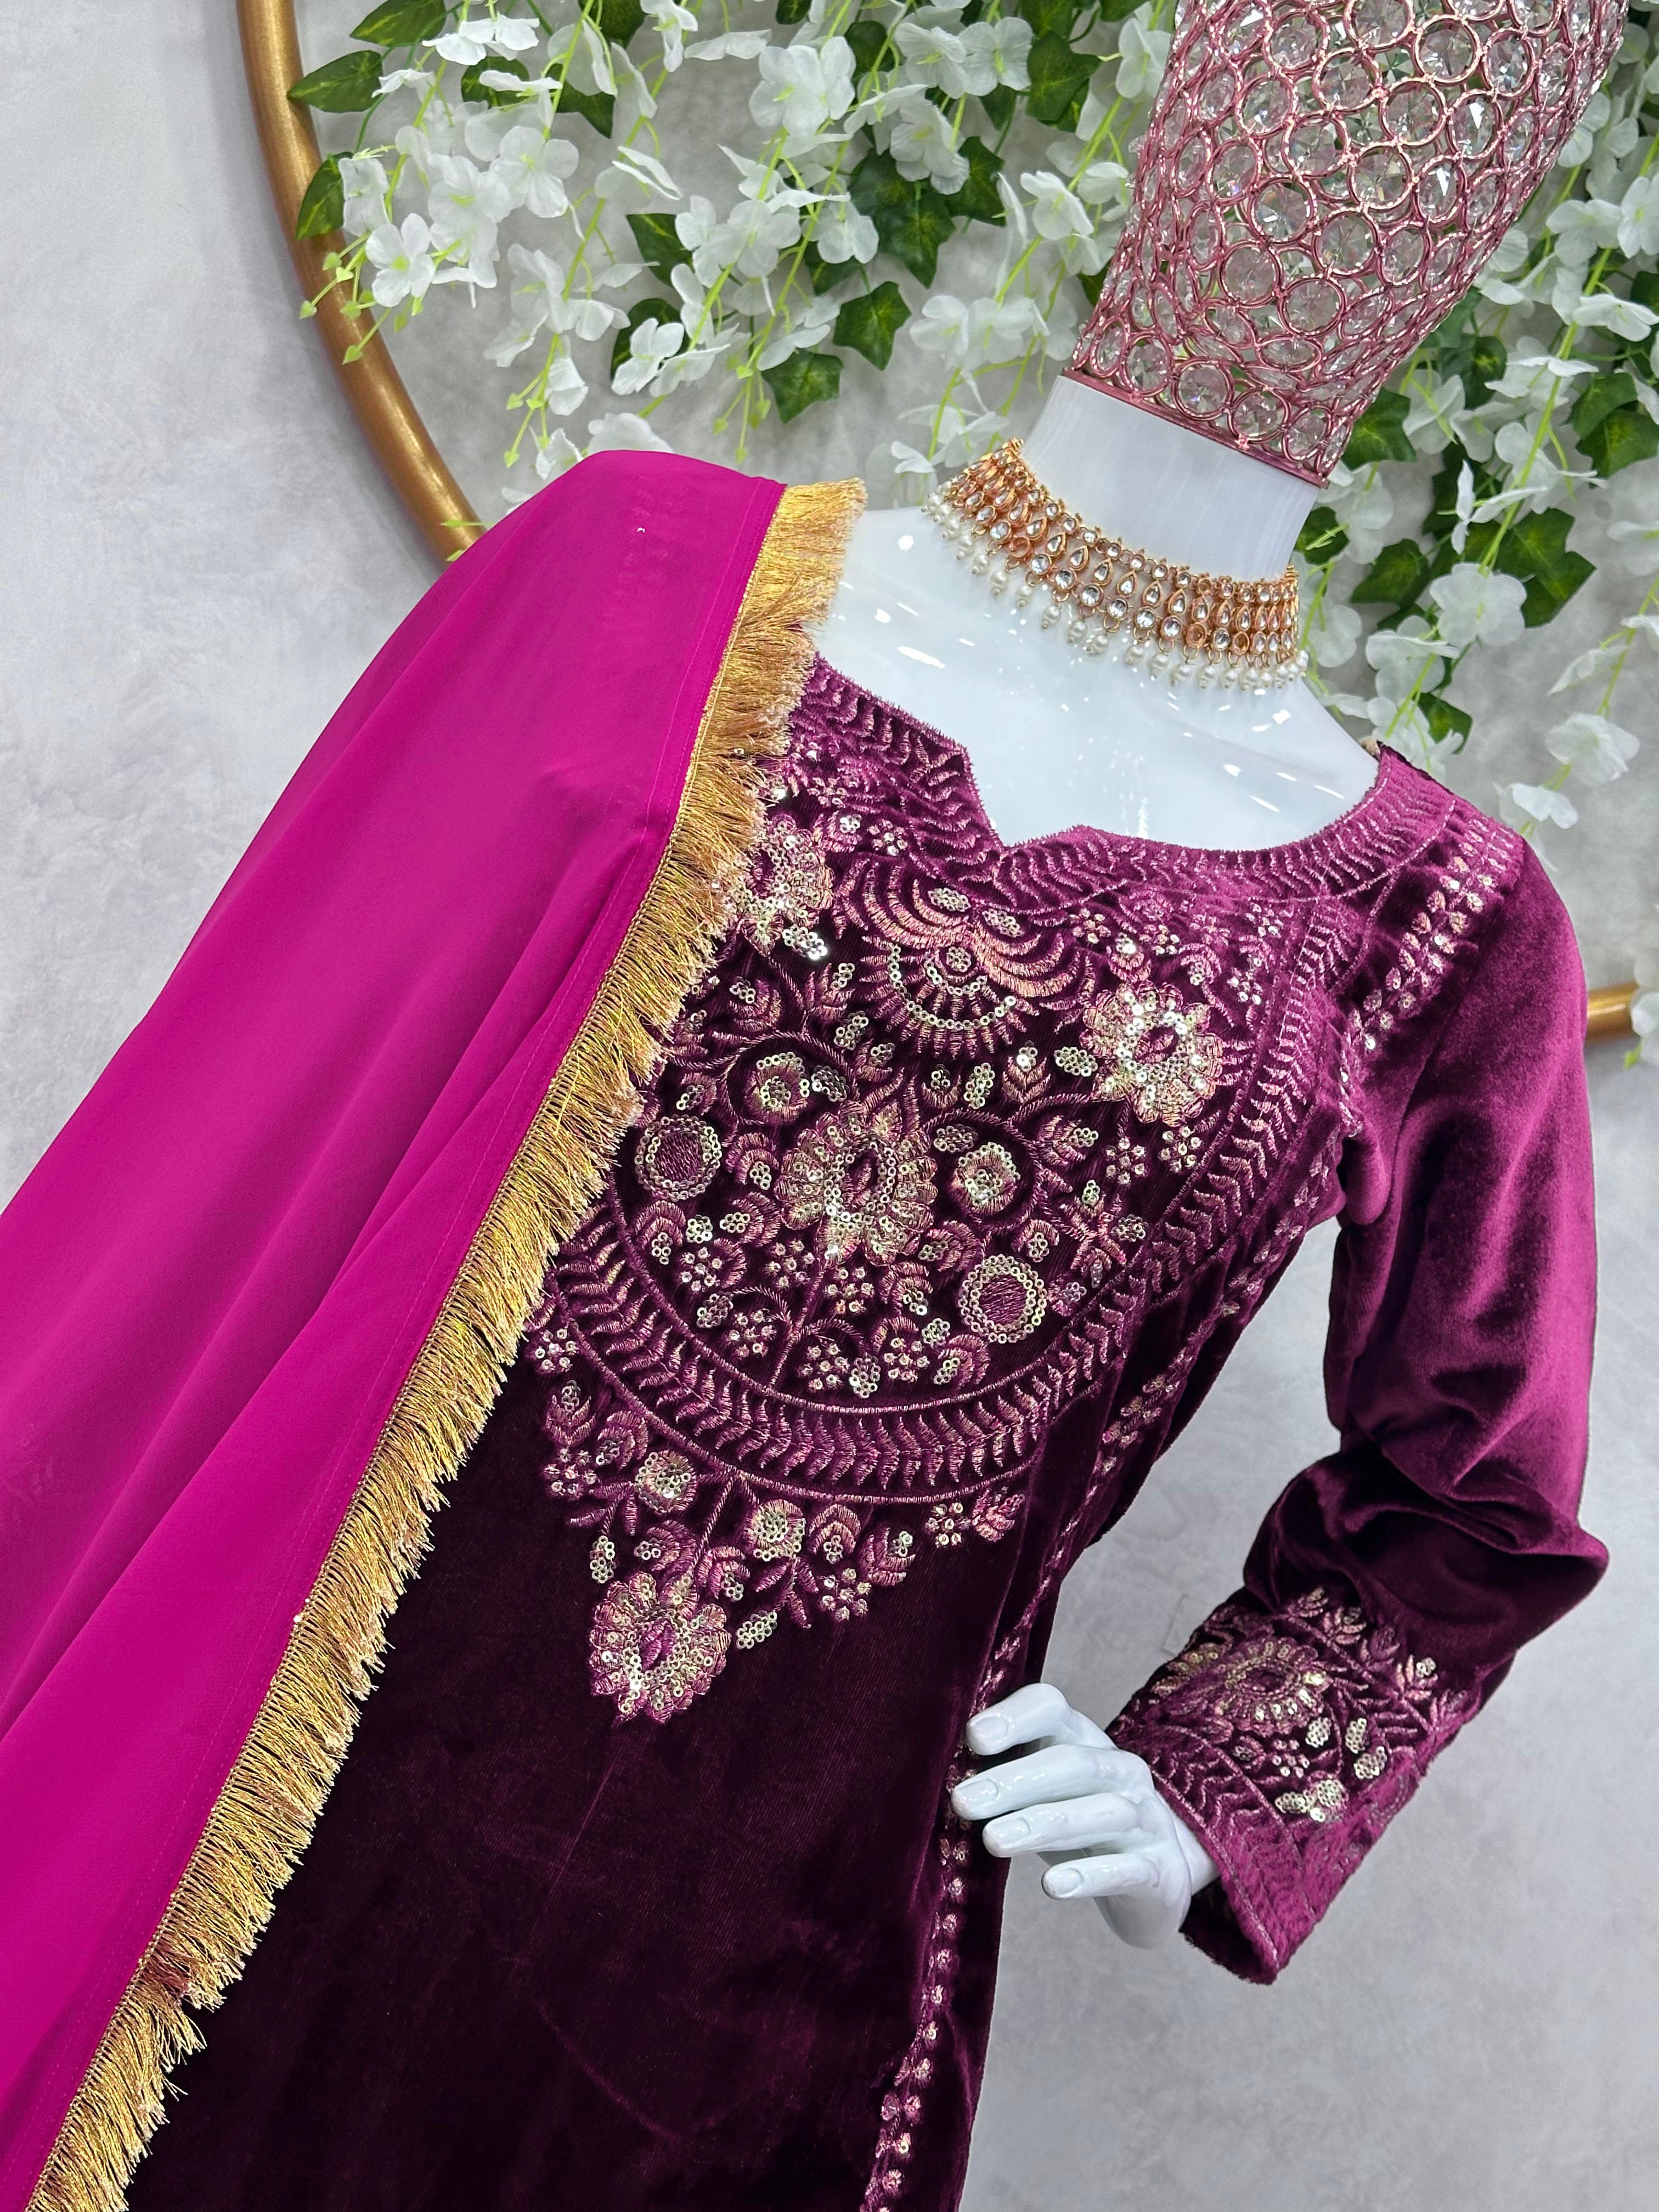 Feminine Store(By Sanna) on Instagram: “price 3850..Pure raw silk suit with  tilla heavy on patch neck sleeves half pure dupatta with tilla work”